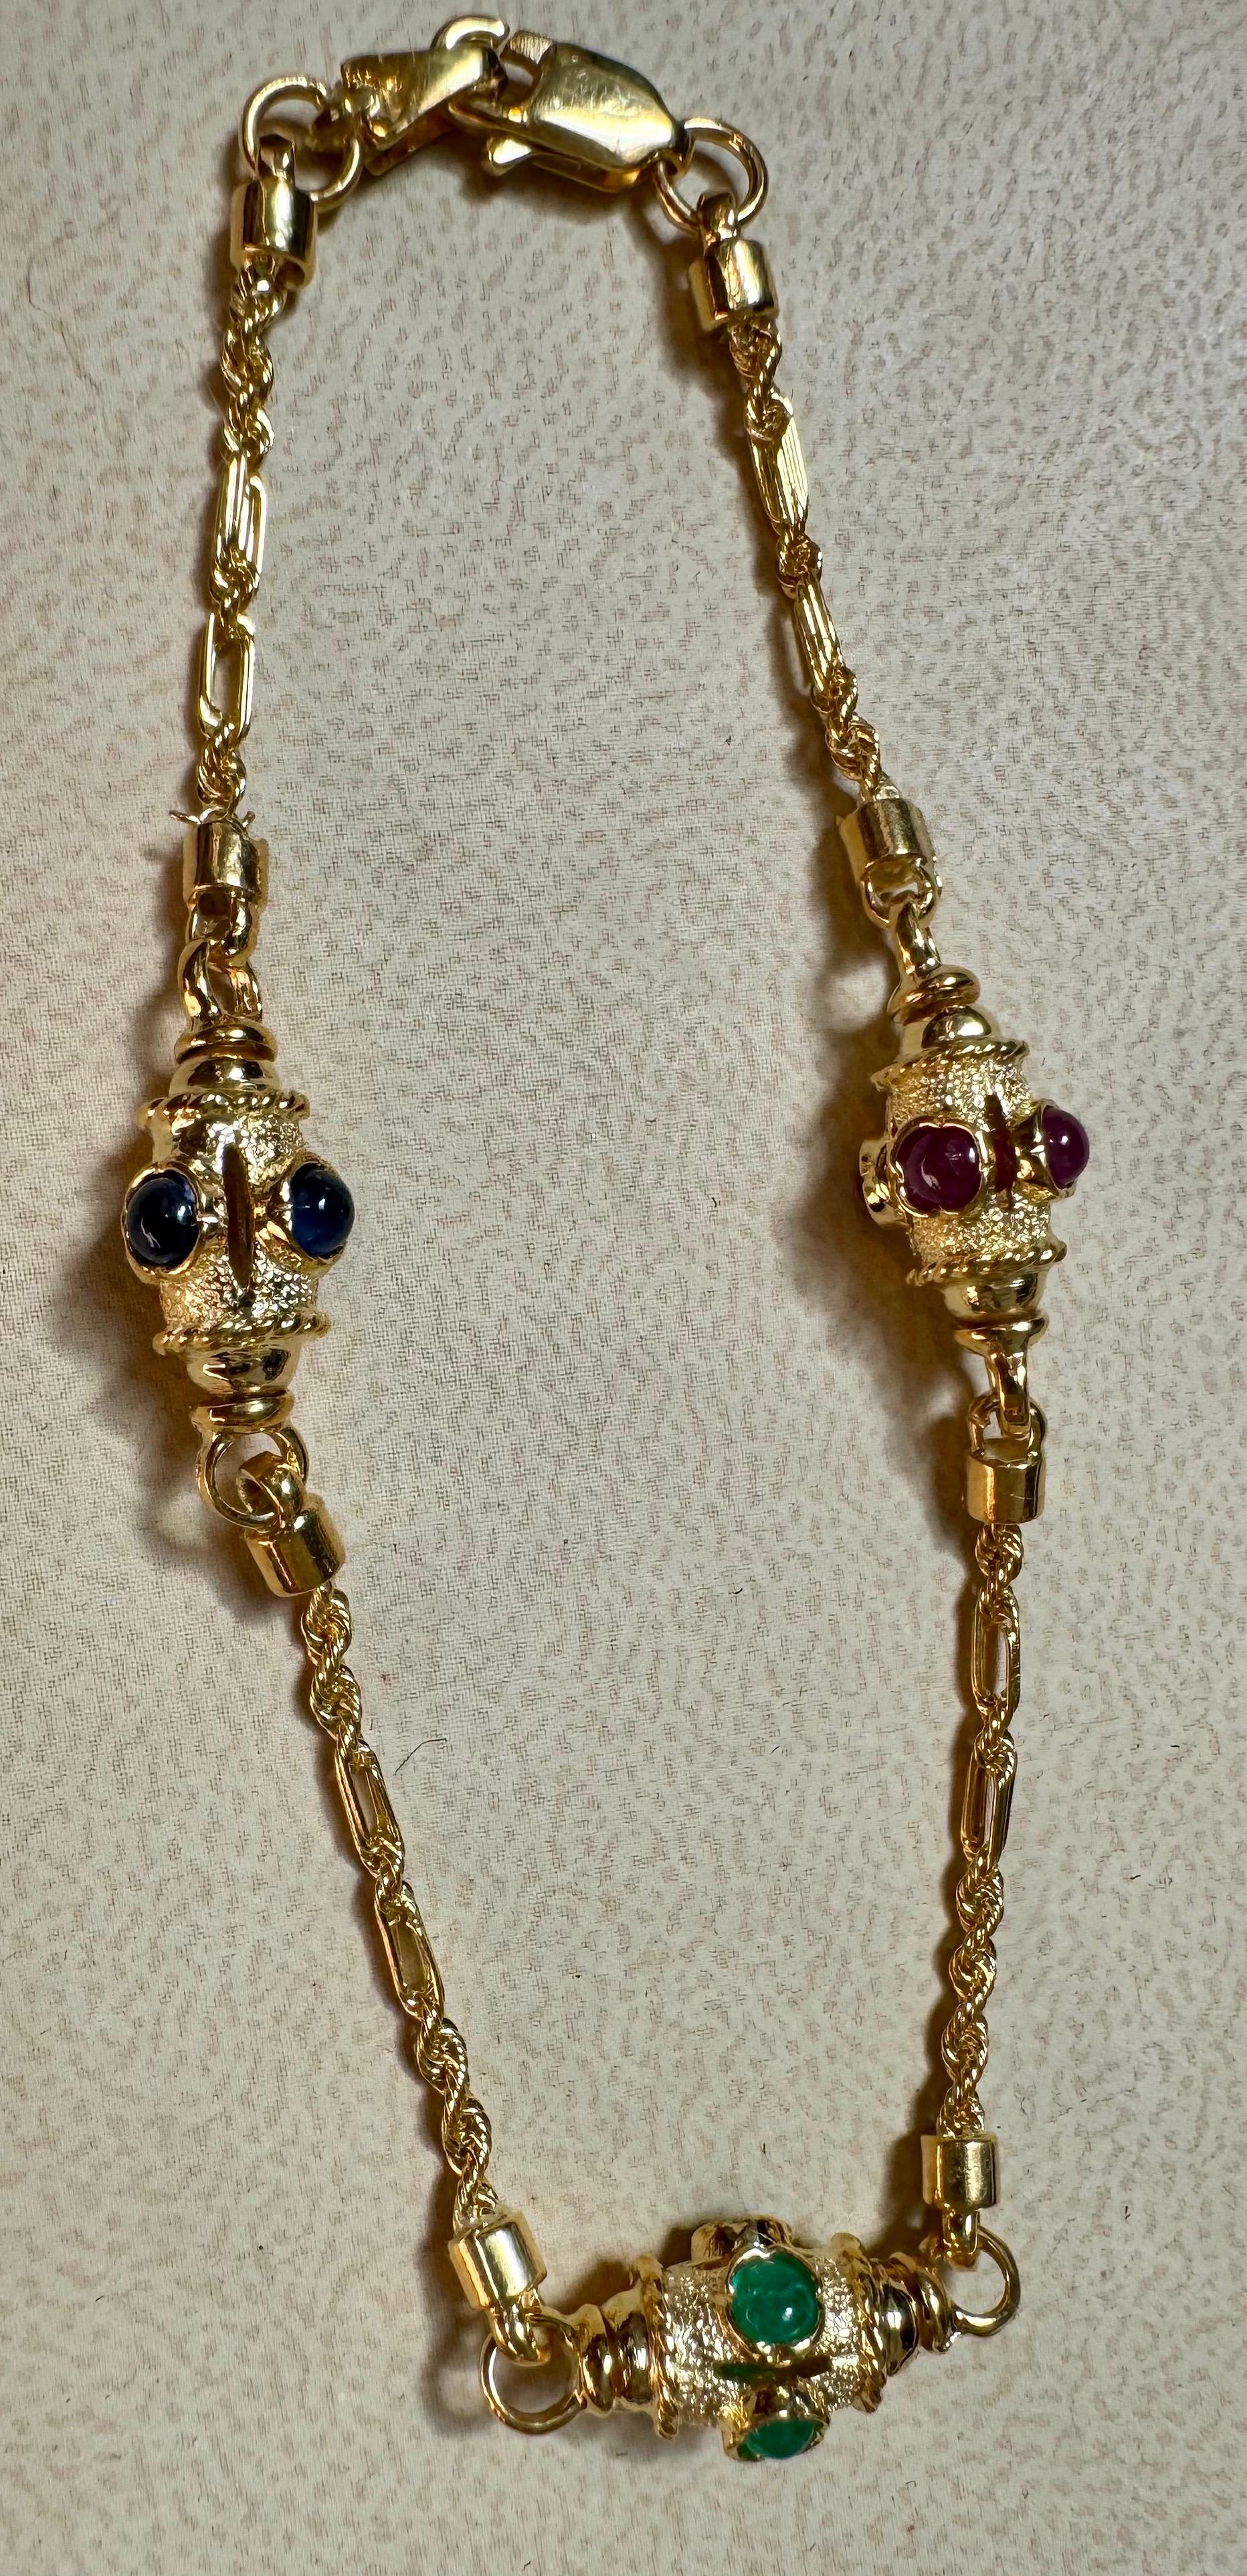 Vintage Emerald Ruby & Sapphire Link Bracelet in 14 Karat Yellow Gold, 7.5 Inchs

 14 Karat Yellow Gold Chain link  Bracelets, 9.4 Gm, Length 7.5 Inch

Beautiful three drum design, one drum shape structure has  ruby another one  emerald  cabochon